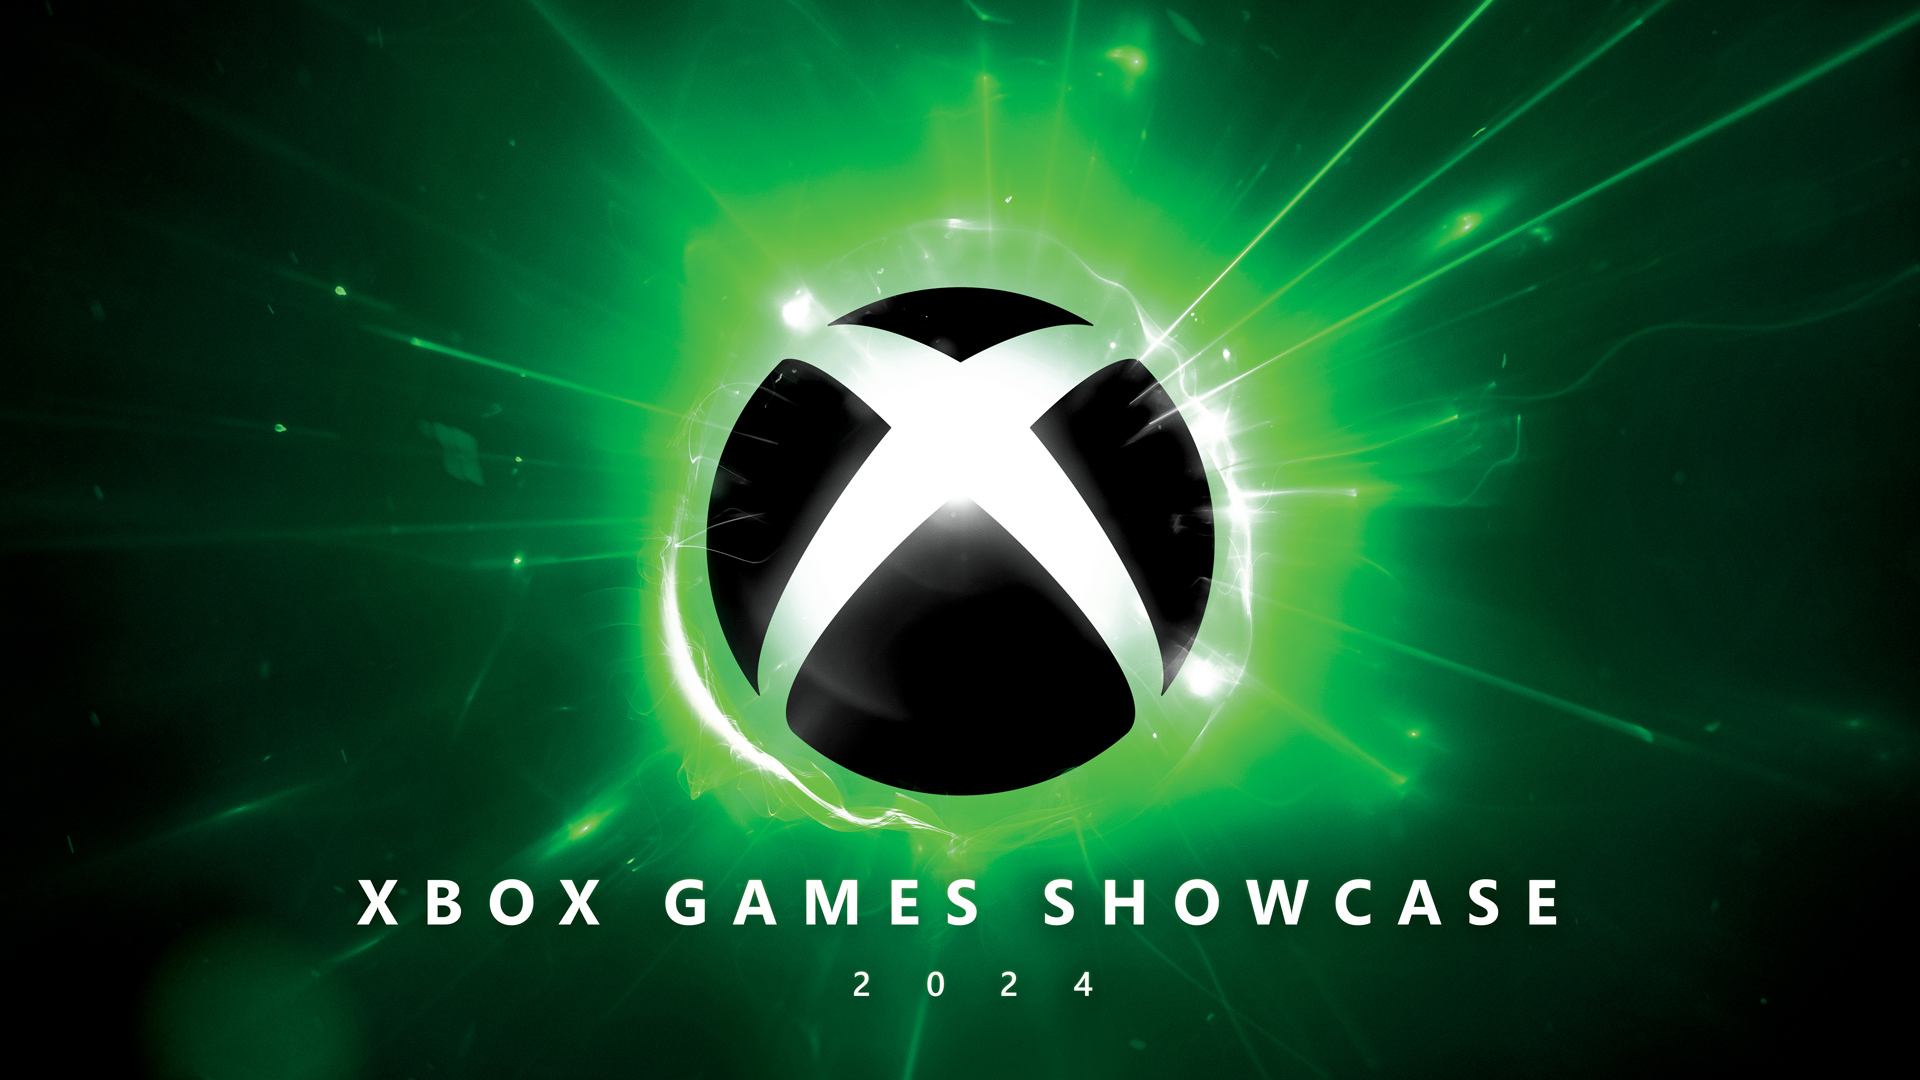 The best of the Xbox Games Showcase 2024 new games, consoles and more